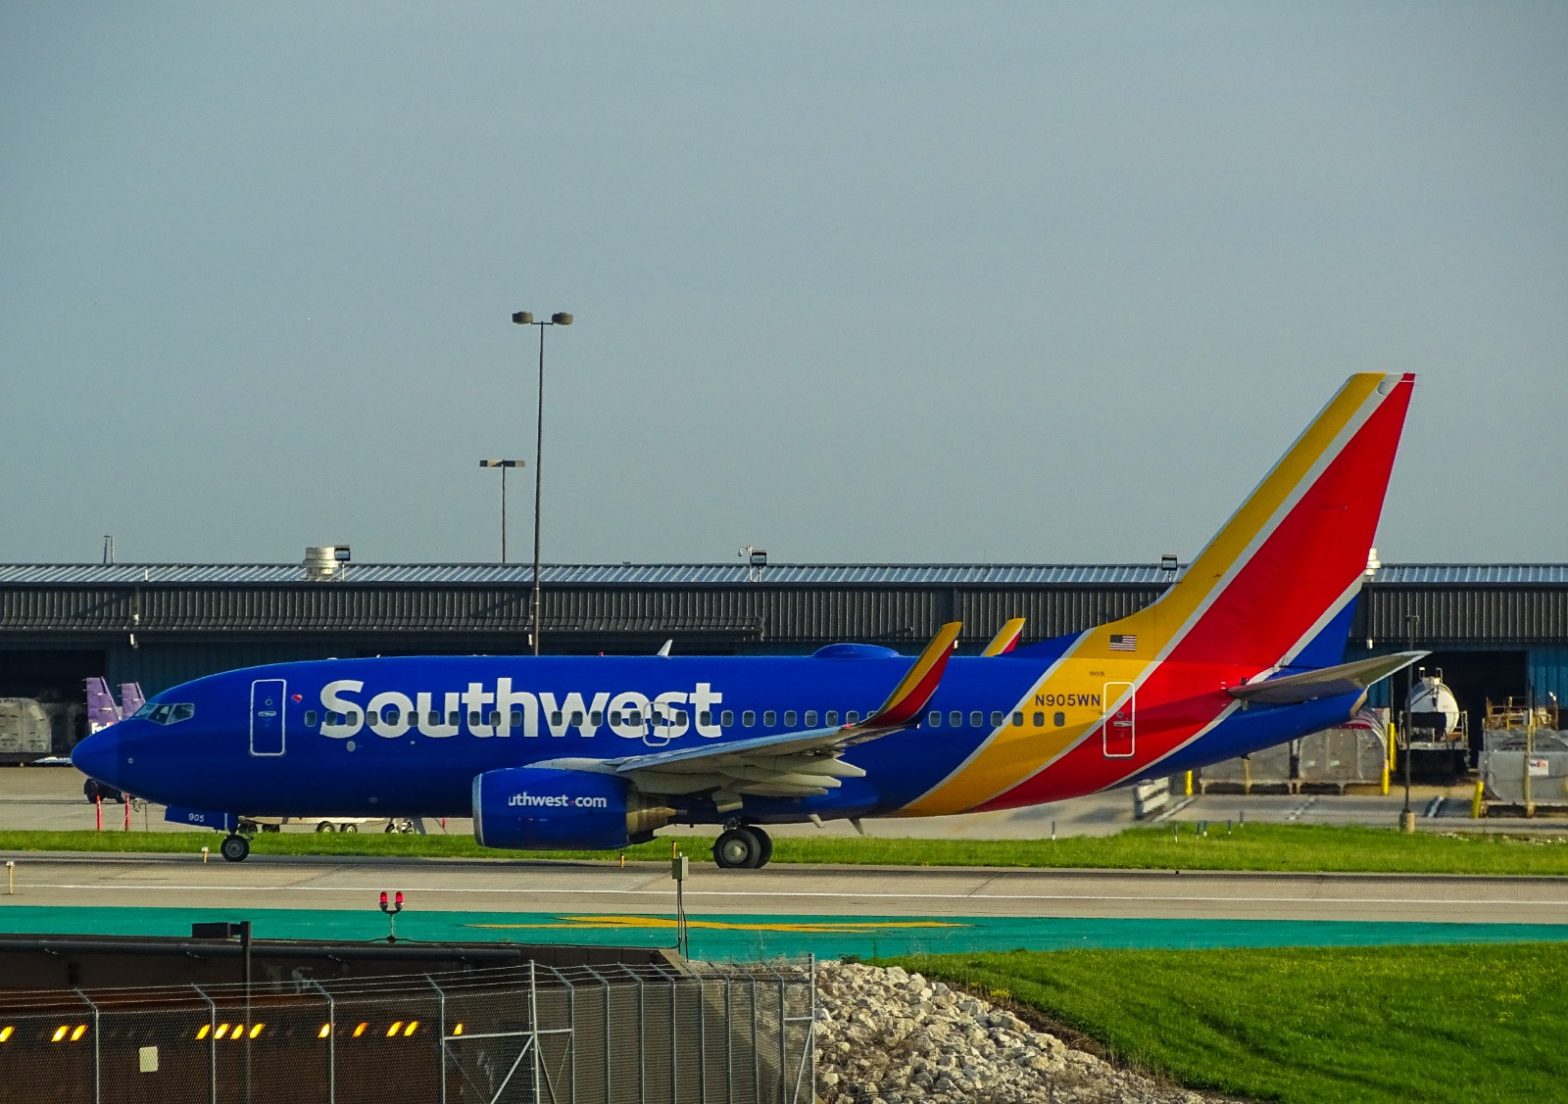 Southwest Airlines grounds all flights across US after technology issue